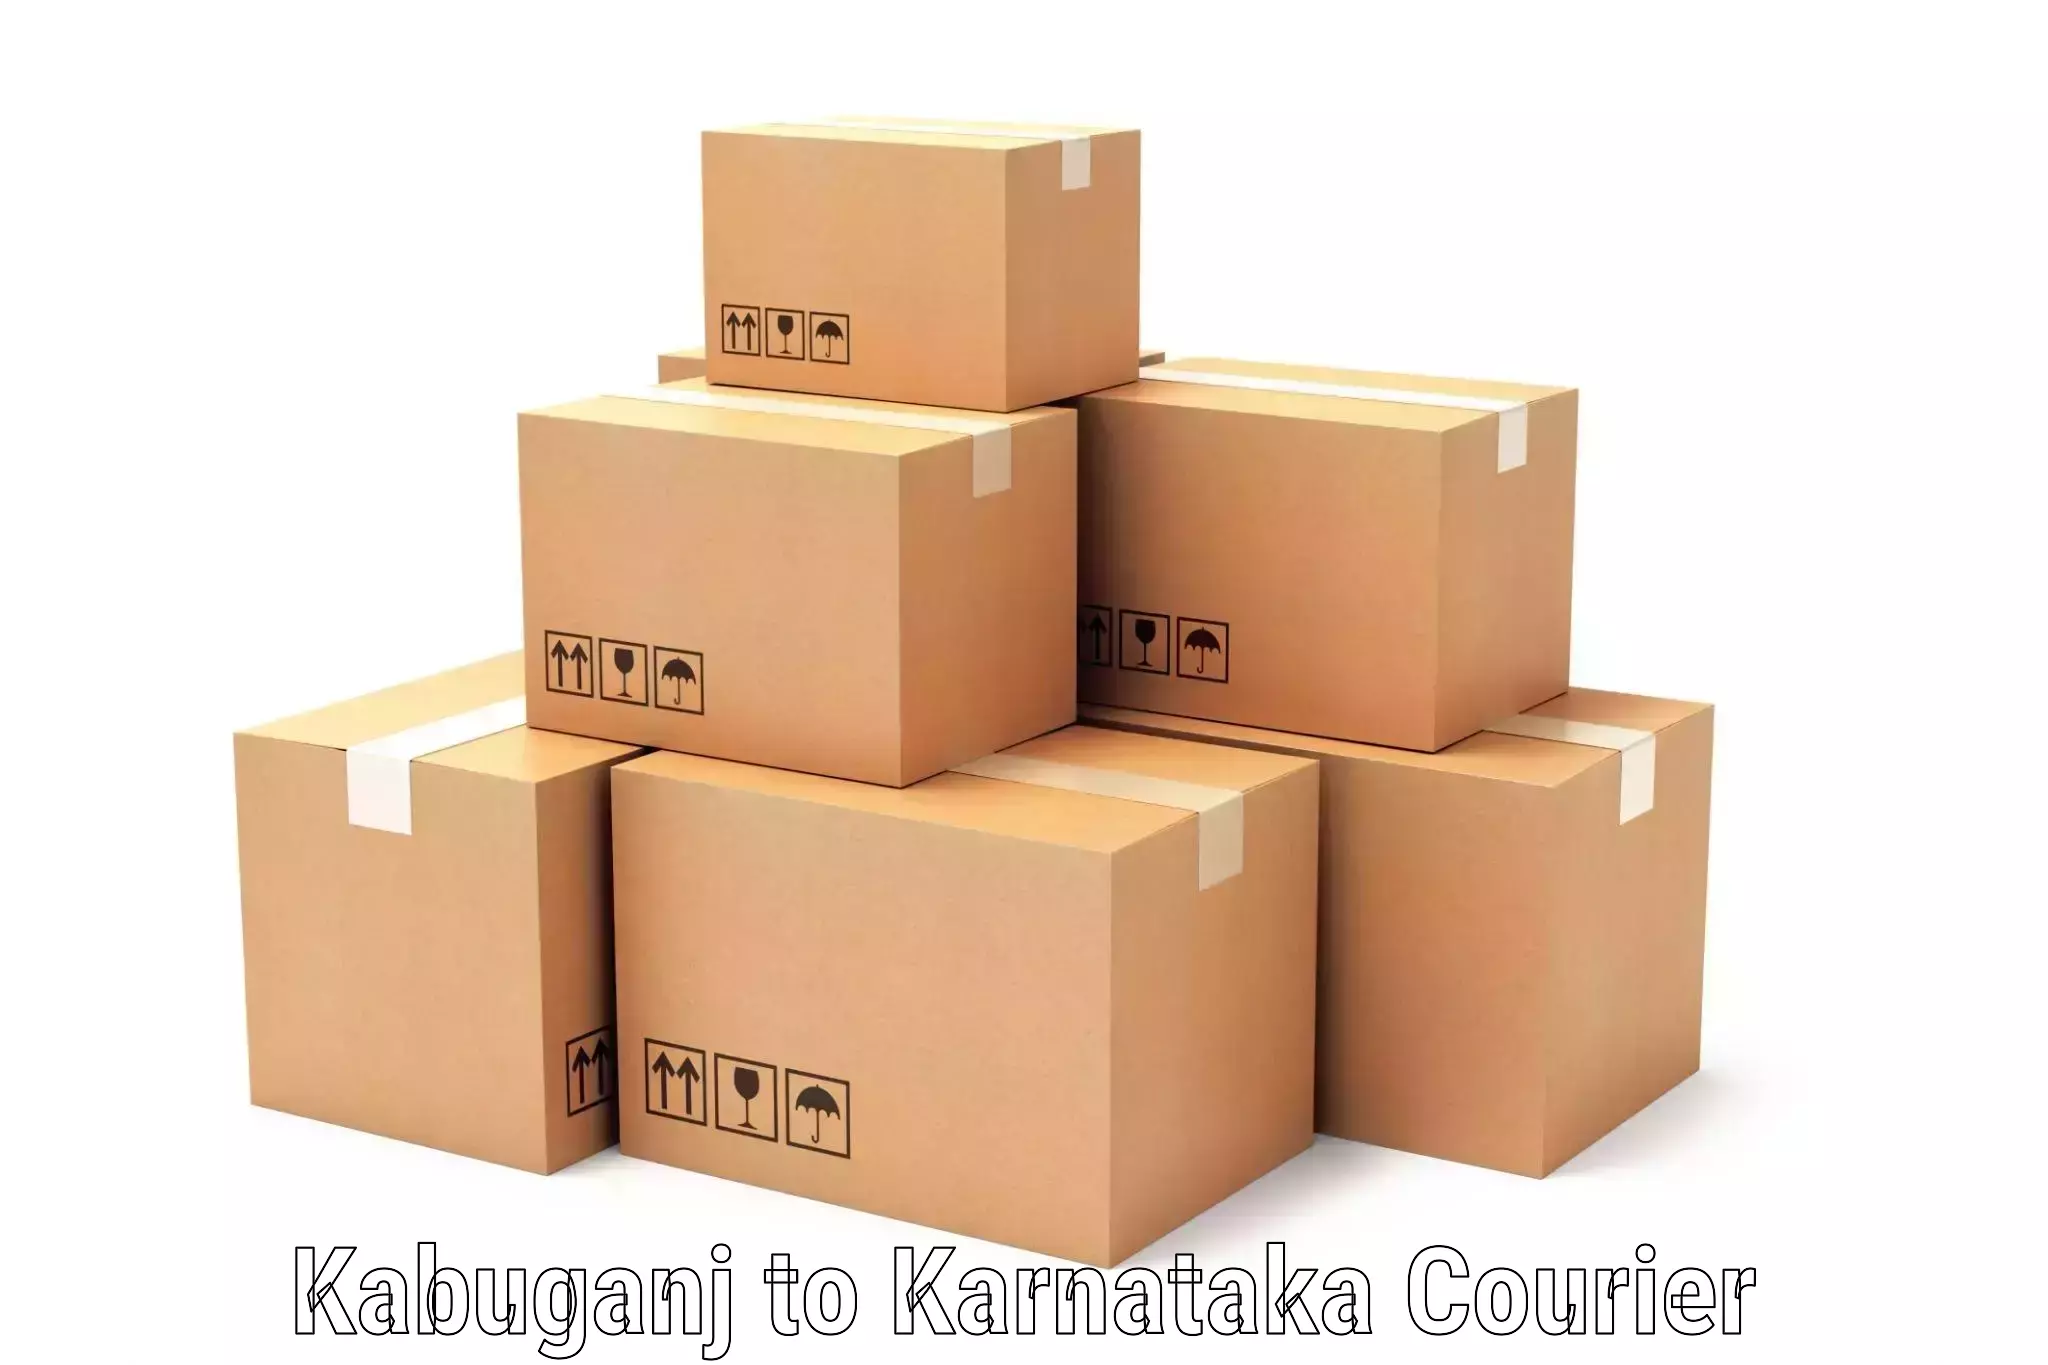 On-call courier service Kabuganj to Yellare